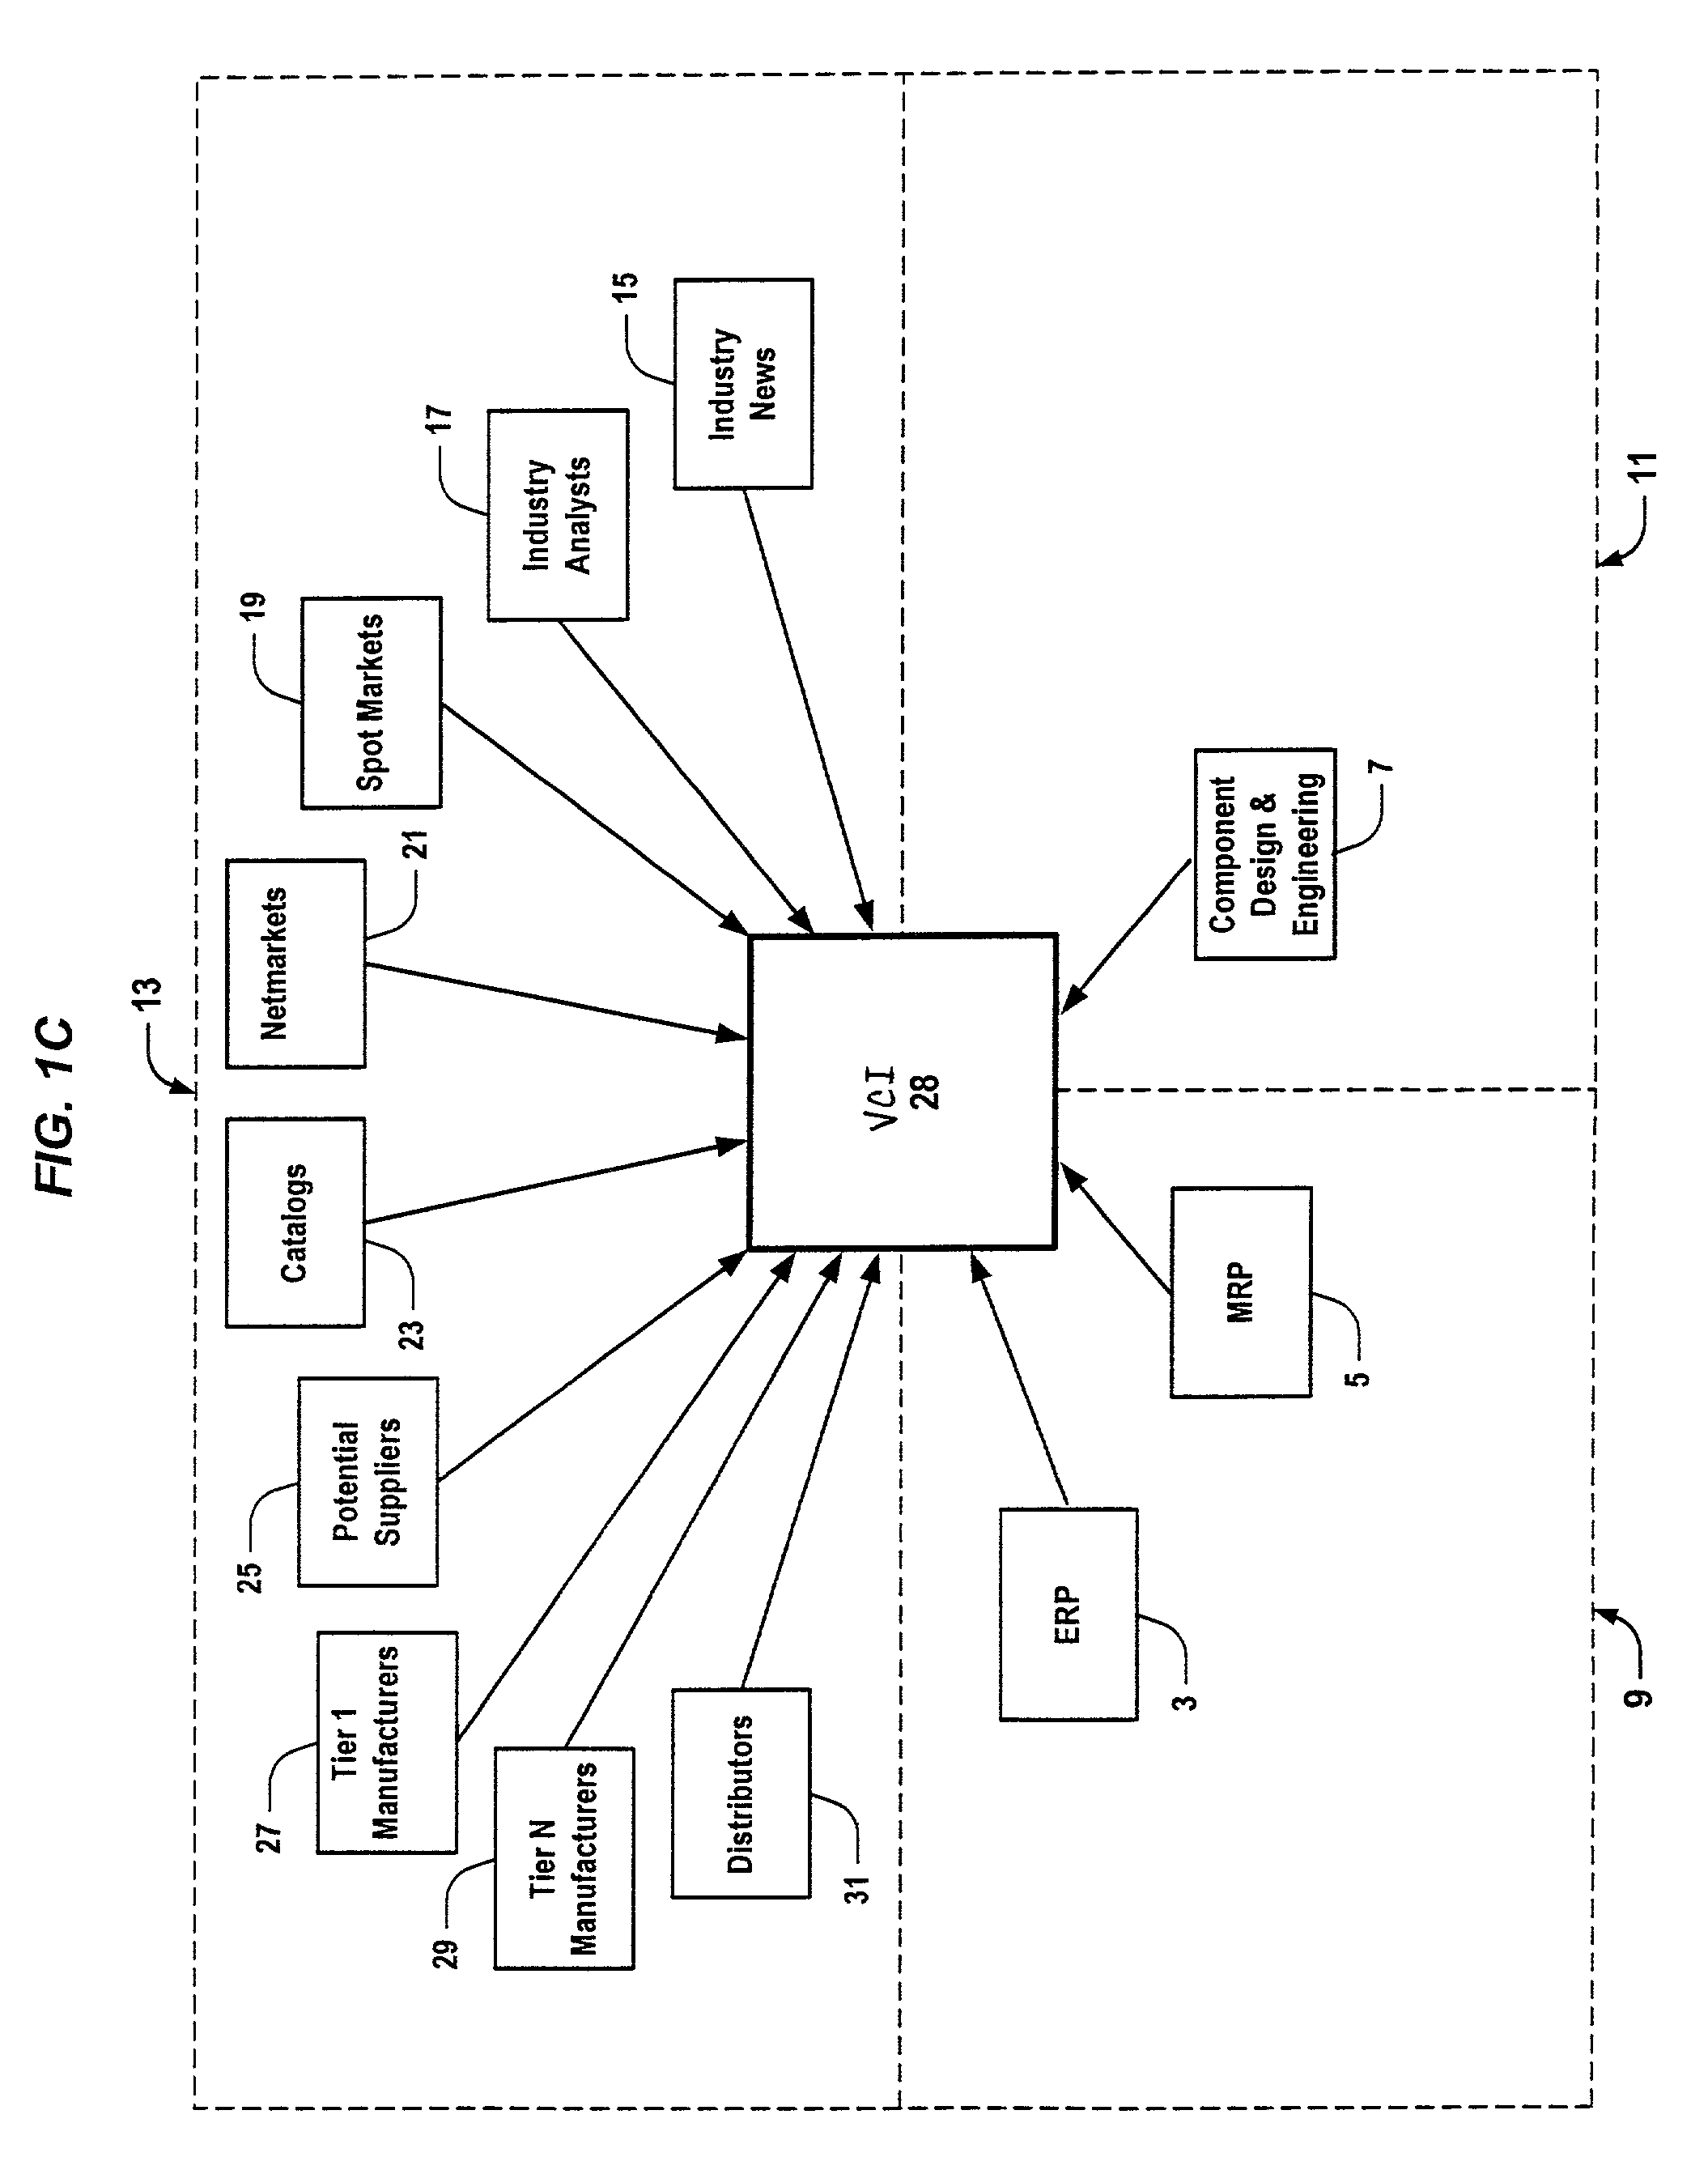 Method for managing a workflow process that assists users in procurement, sourcing, and decision-support for strategic sourcing